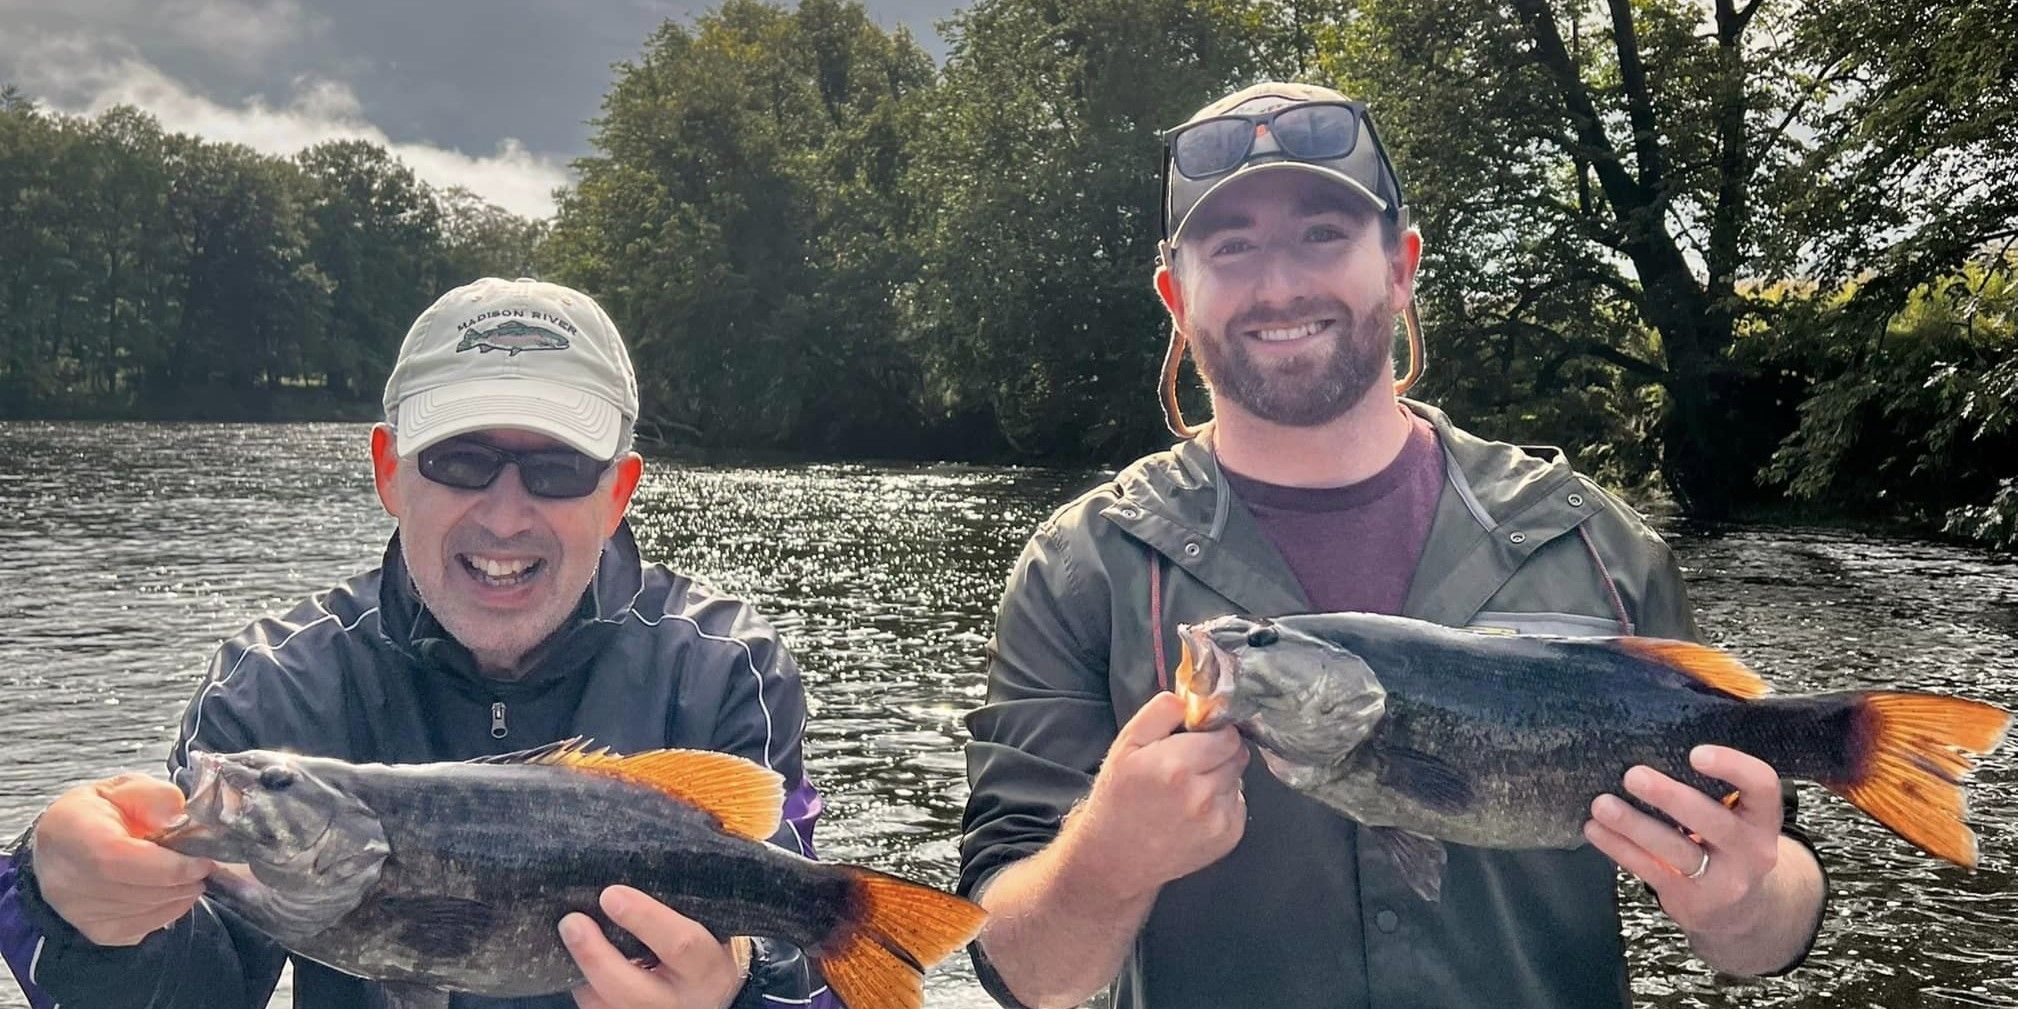 Maine Fly Guide LLC Androscoggin River Fishing Charters | Private 8-Hour Charter Trip fishing River